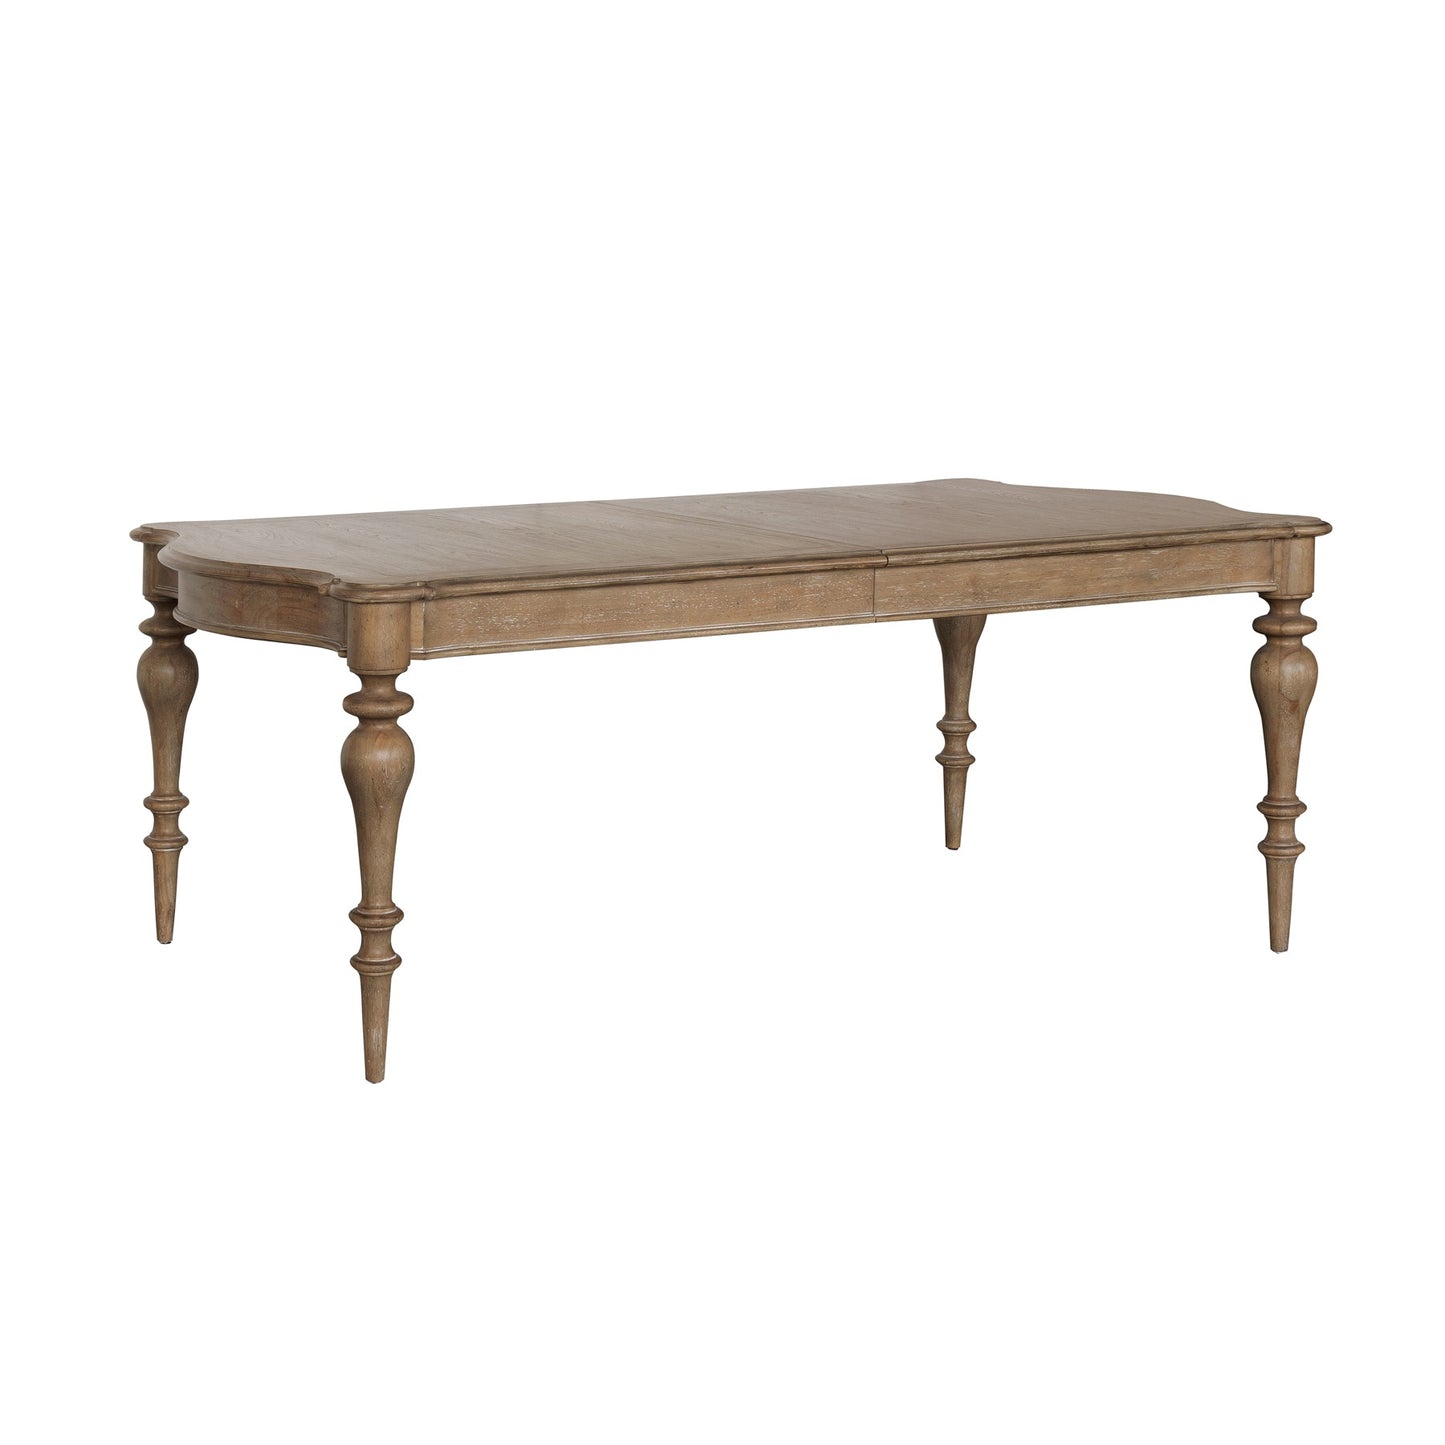 Pulaski Weston Hills Dining Collection - Classic French Design